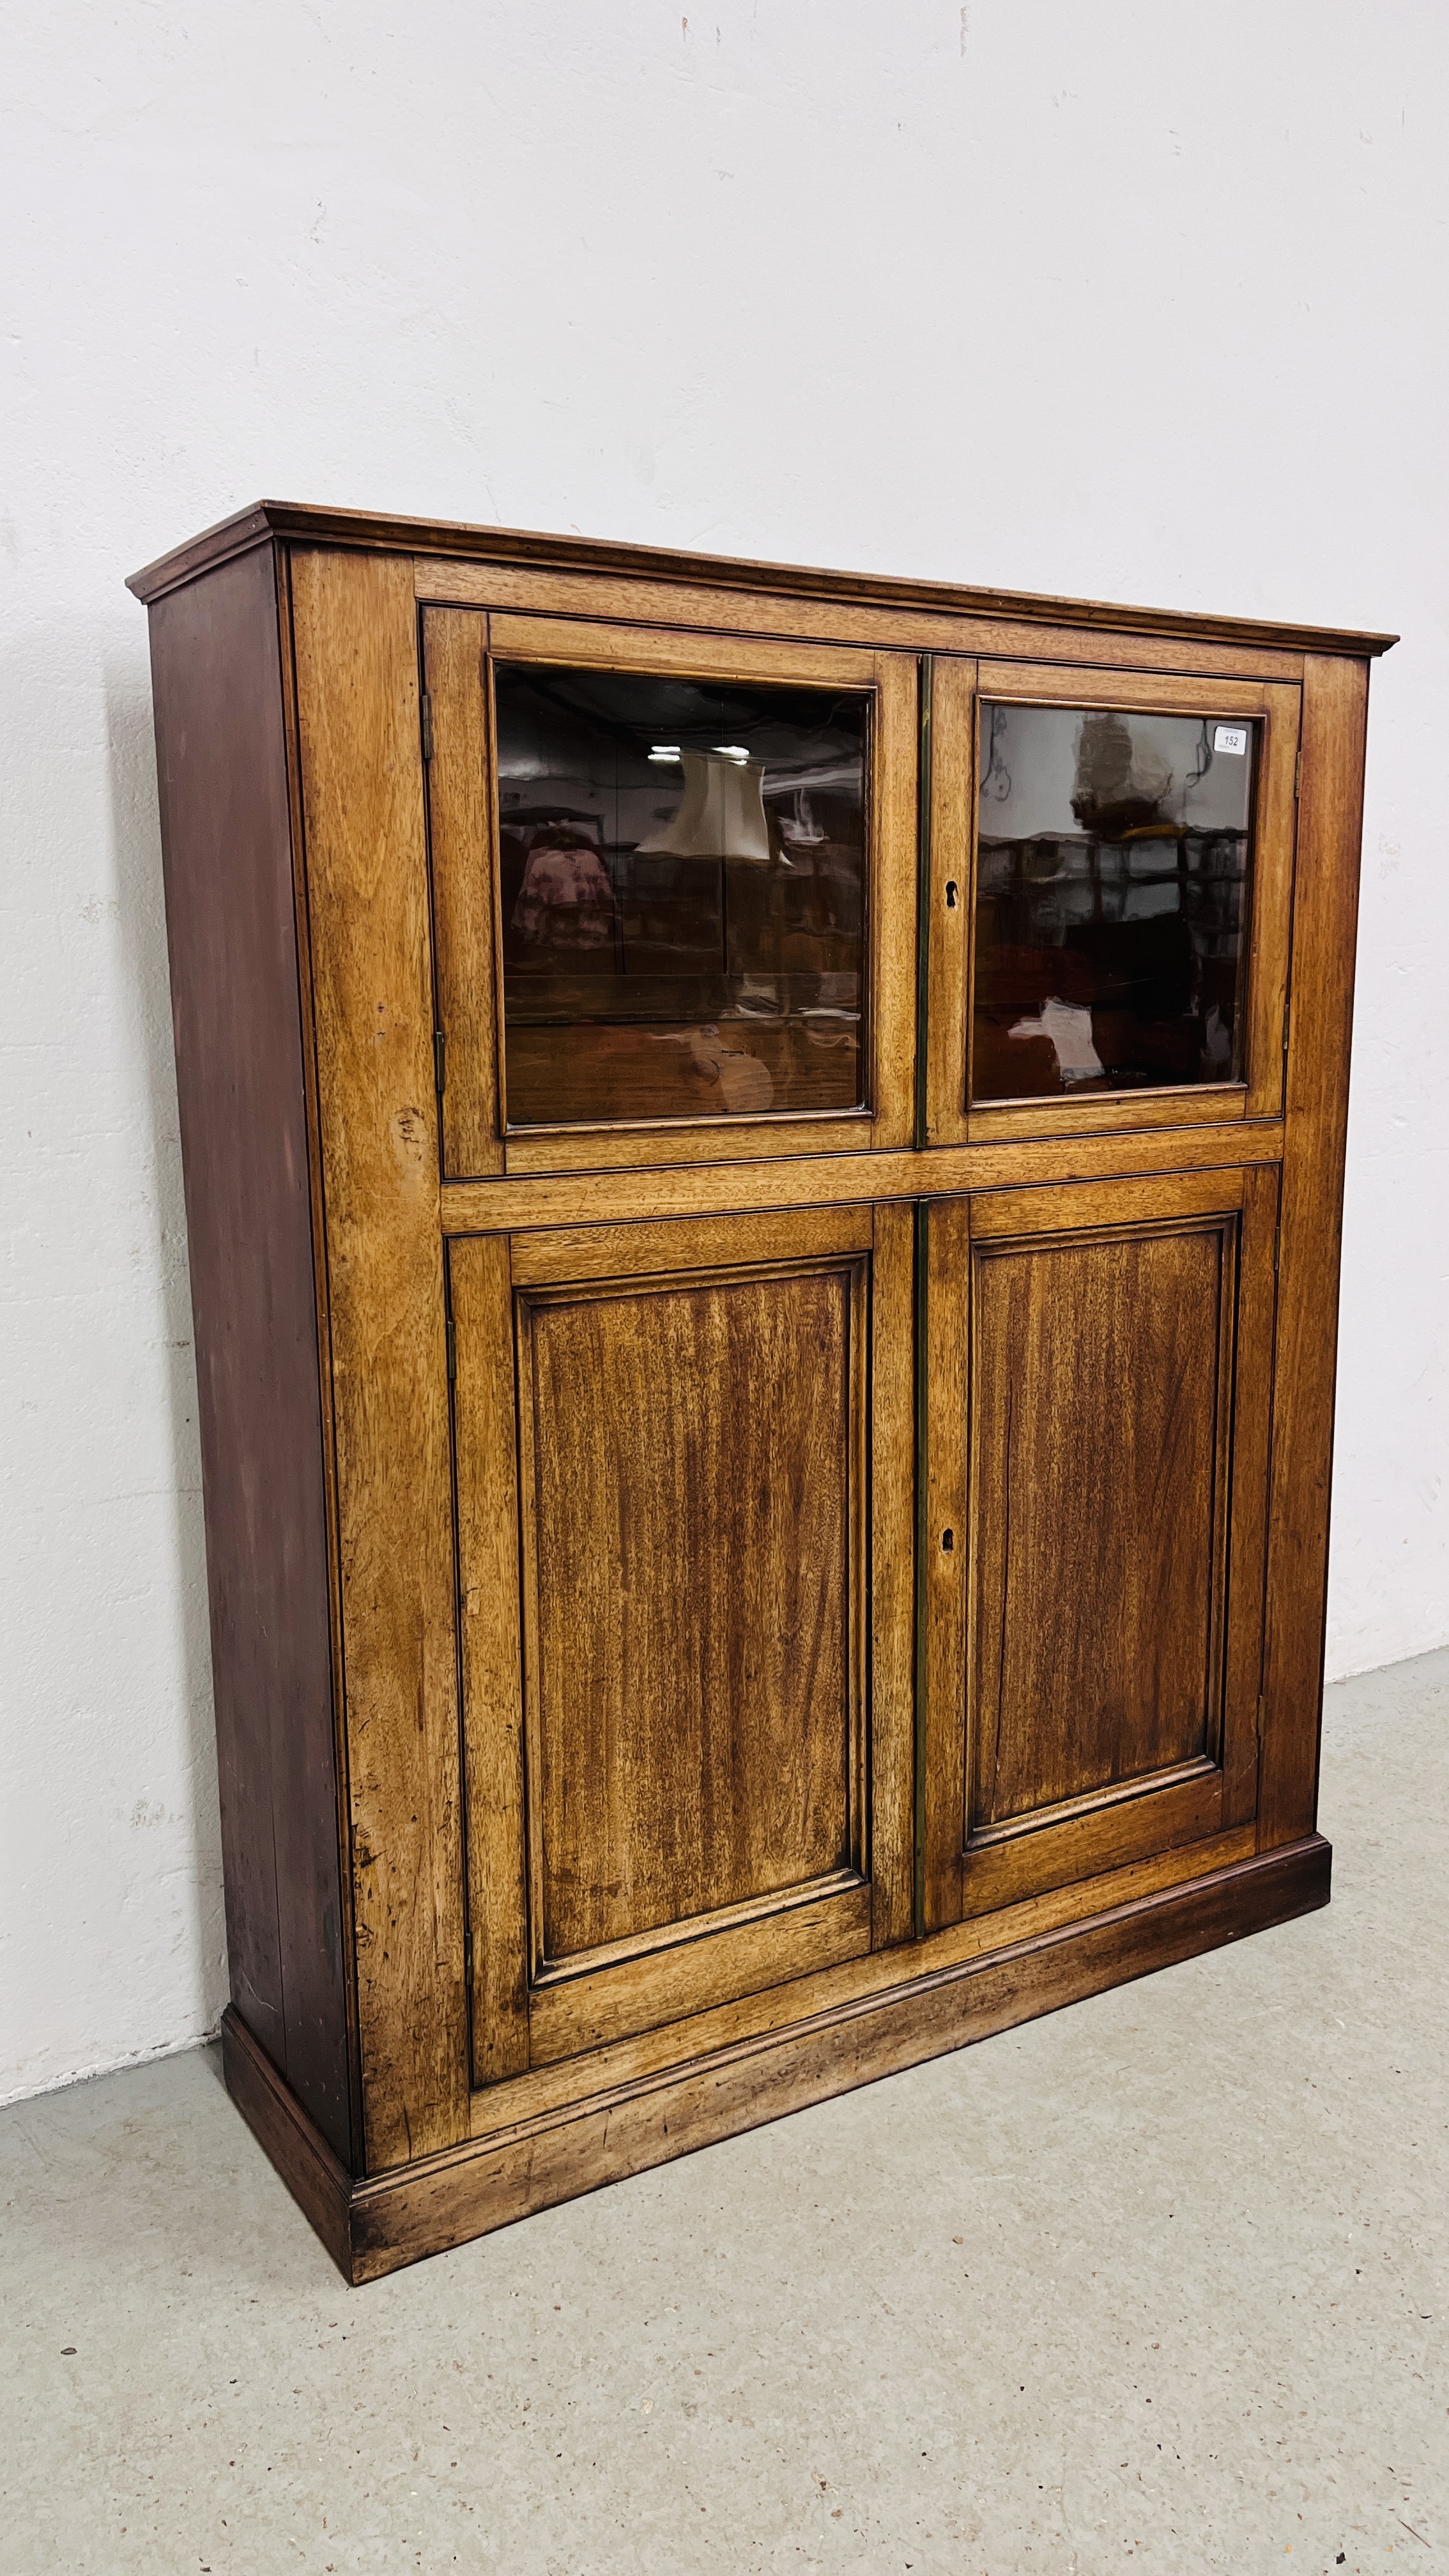 A MAHOGANY TWO DOOR CUPBOARD WITH GLAZED TWO DOOR CABINET ABOVE, W 112CM, D 33CM, H 131CM. - Image 2 of 8